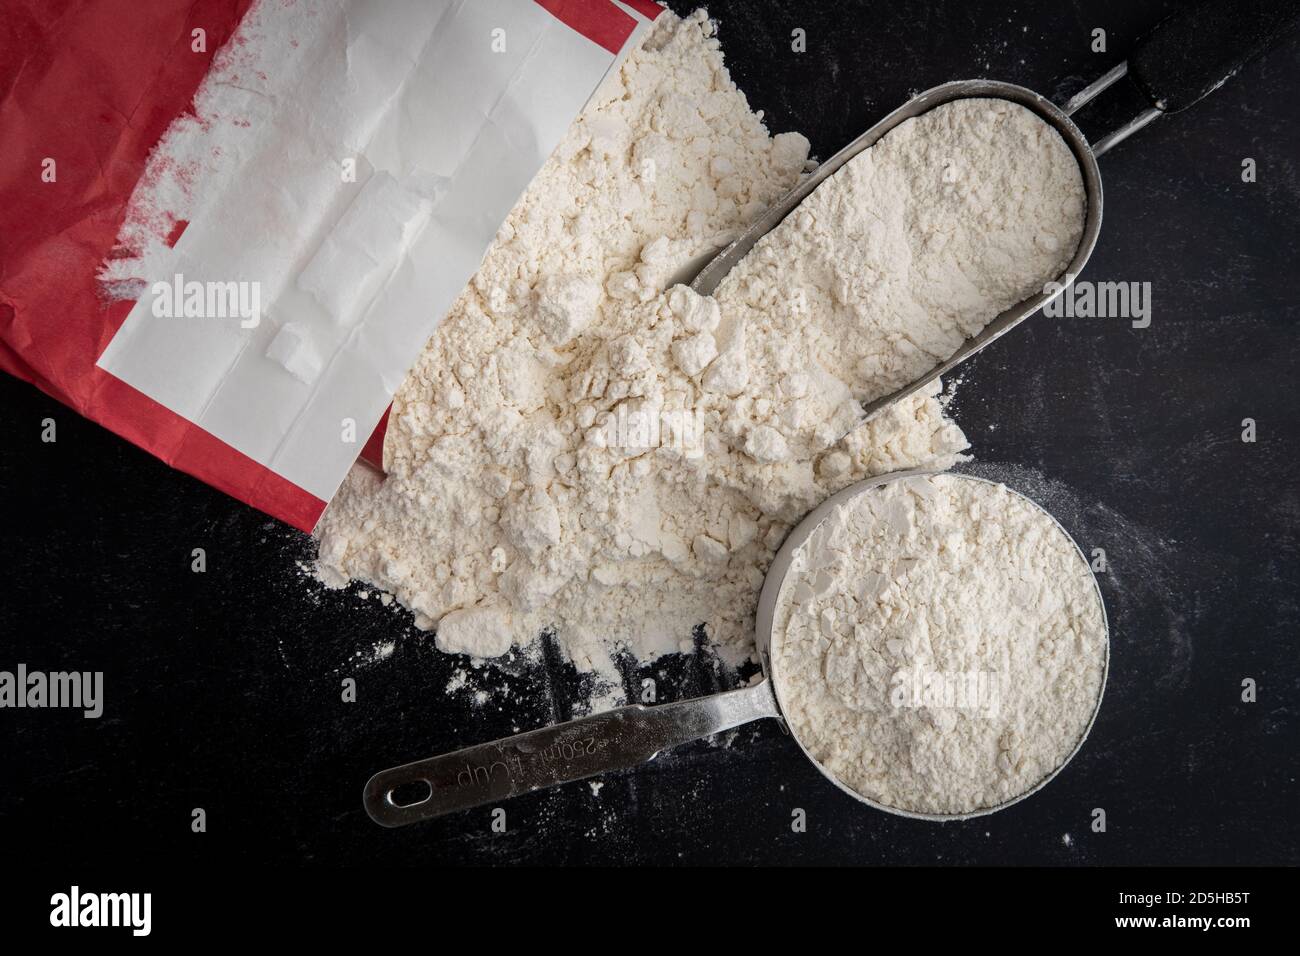 Bag of flour poured on the counter with a scoop and measuring cup Stock Photo